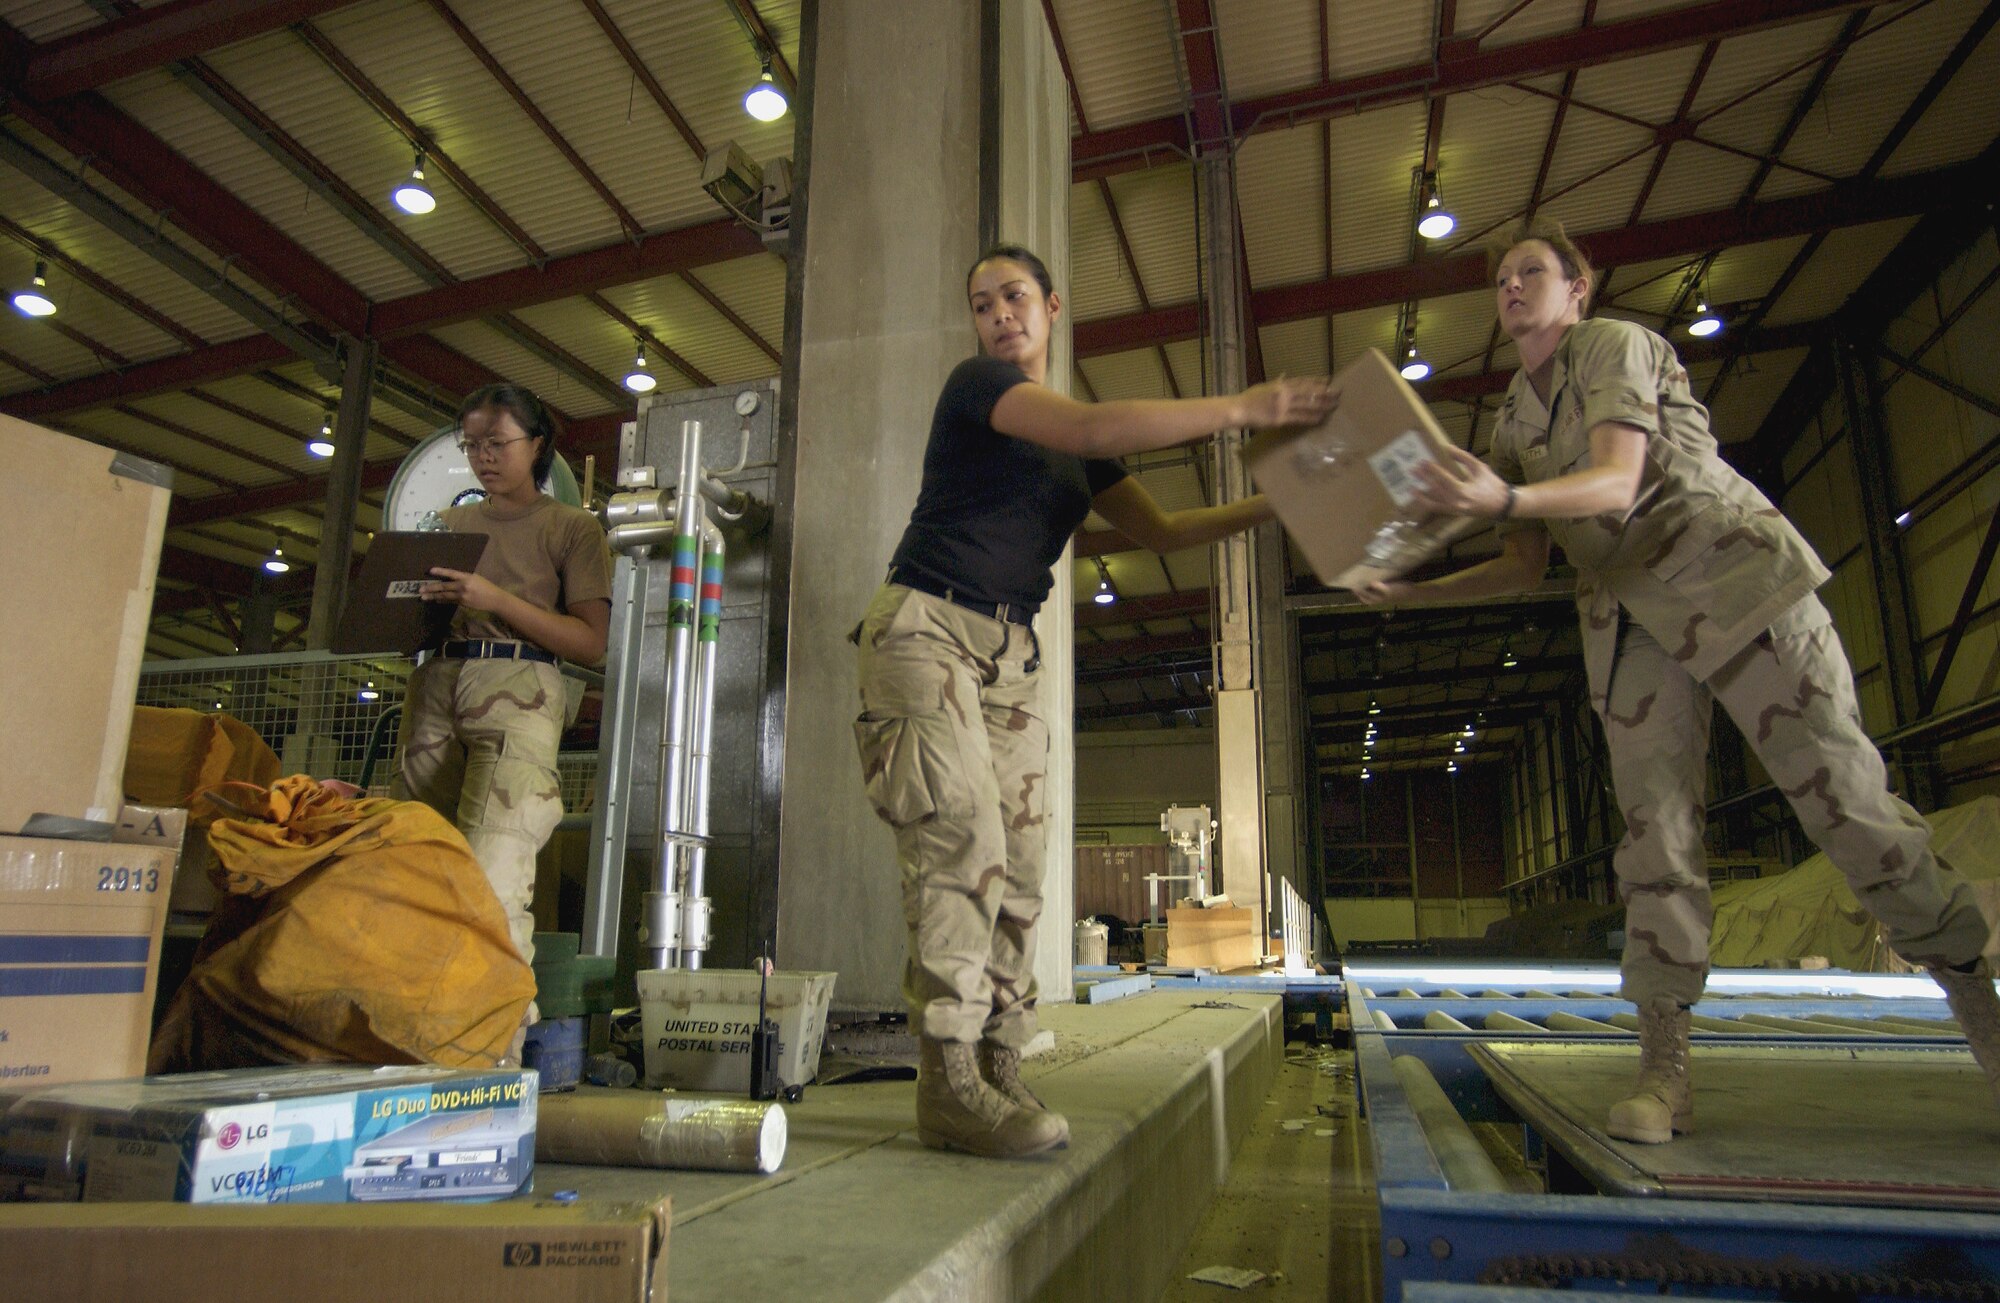 BAGHDAD INTERNATIONAL AIRPORT, Iraq -- Airman 1st Class Christine Mayor, Senior Airman Alaine Wallace and Capt. Denise Freimuth load mail onto pallets in 100-plus degree temperatures.  The 447th Expeditionary Communications Squadron team handles more than 150,000 pounds of mail flowing to and from air post offices at American camps in Iraq every day.  (U.S. Air Force photo by Master Sgt. Keith Reed)